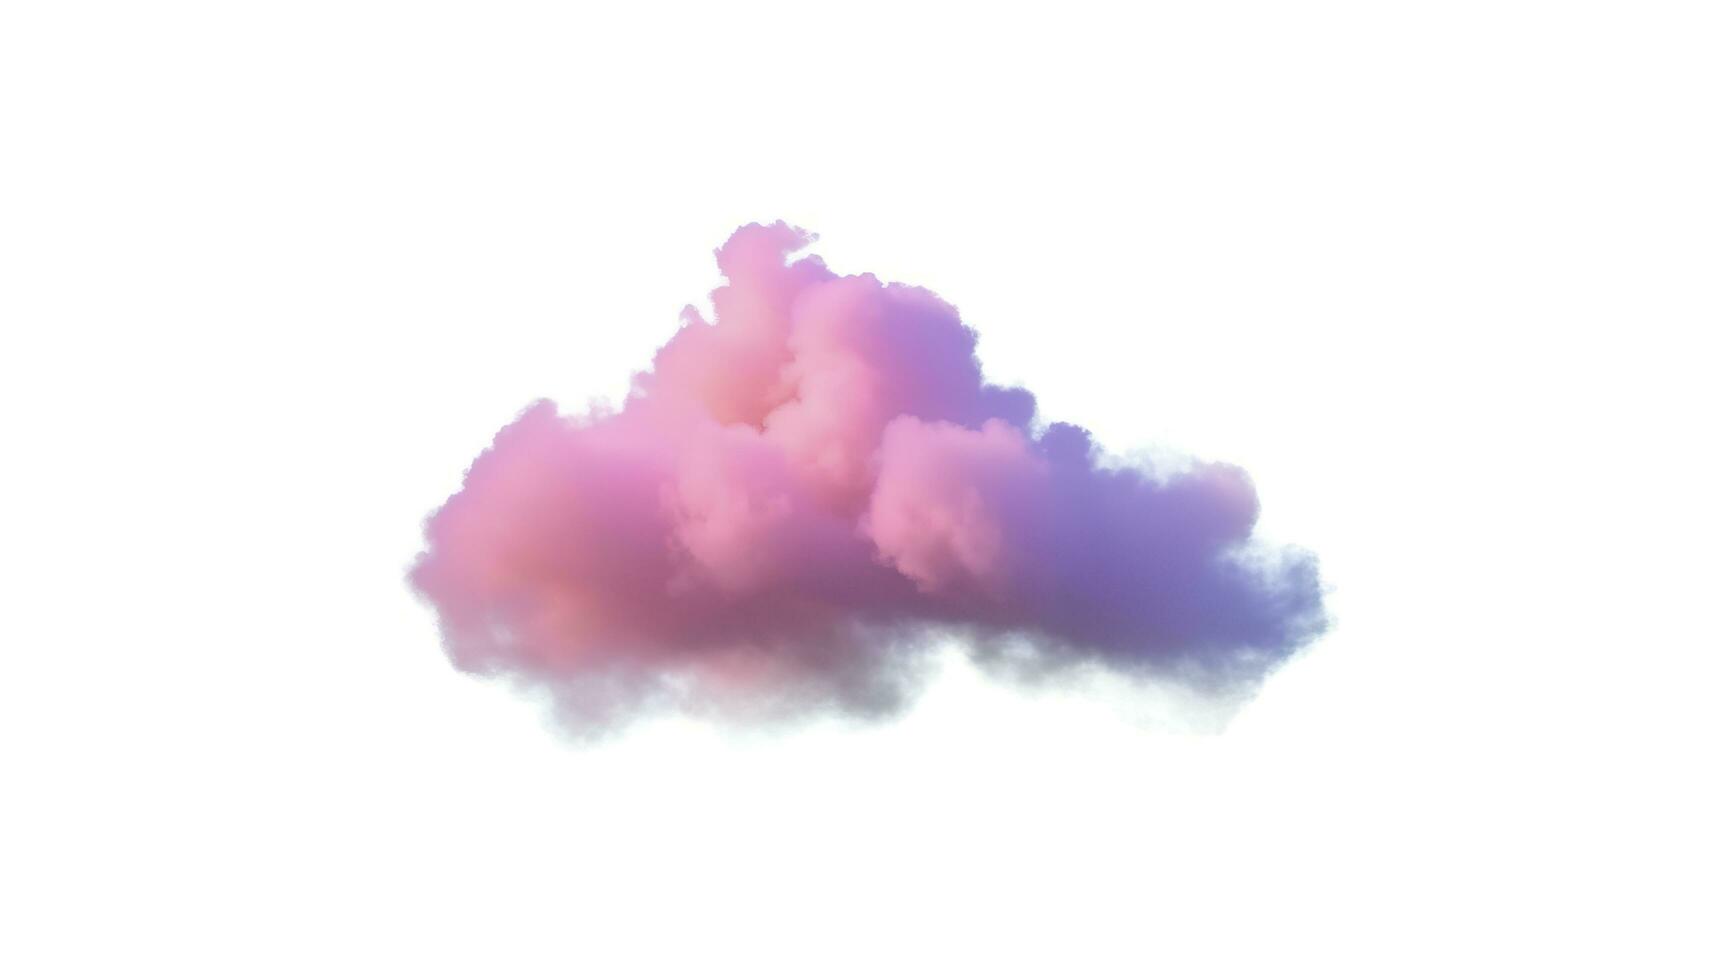 3d render, glowing colorful soft cloud isolated on white background. Fluffy cumulus atmosphere phenomenon. Realistic sky clip art element, generate ai photo